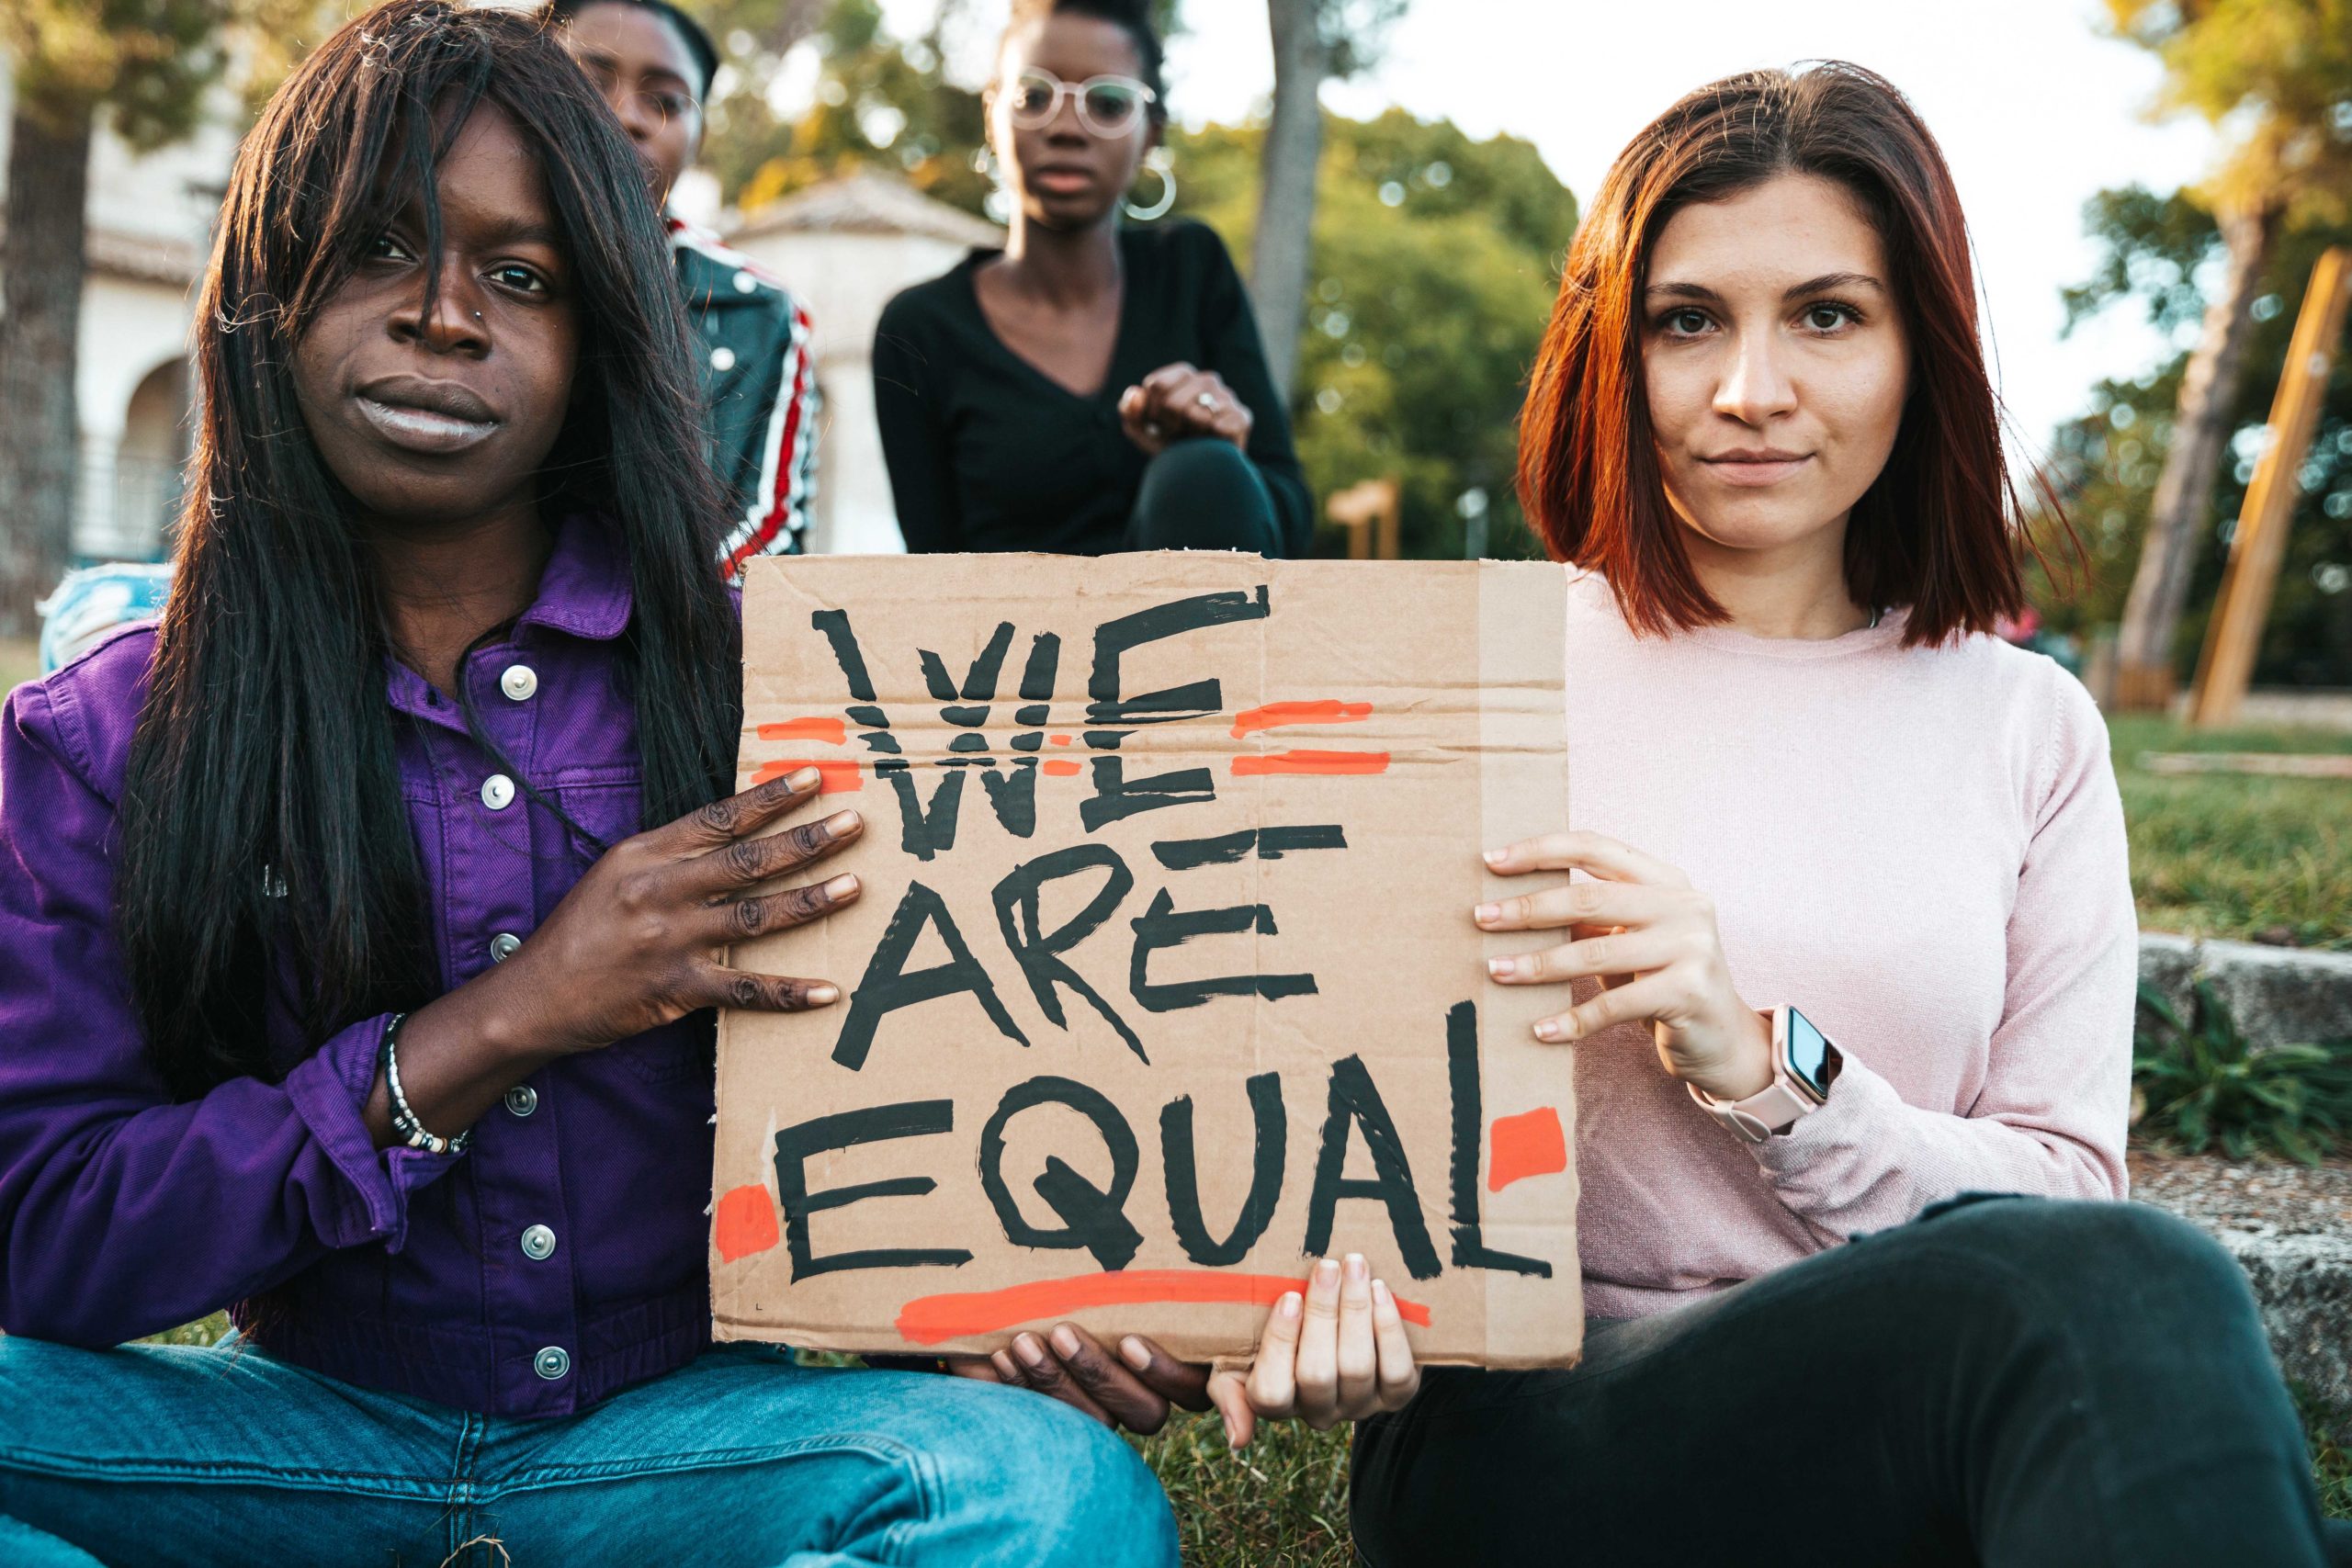 Young Black woman and Jewish woman hold sign that says We Are Equal